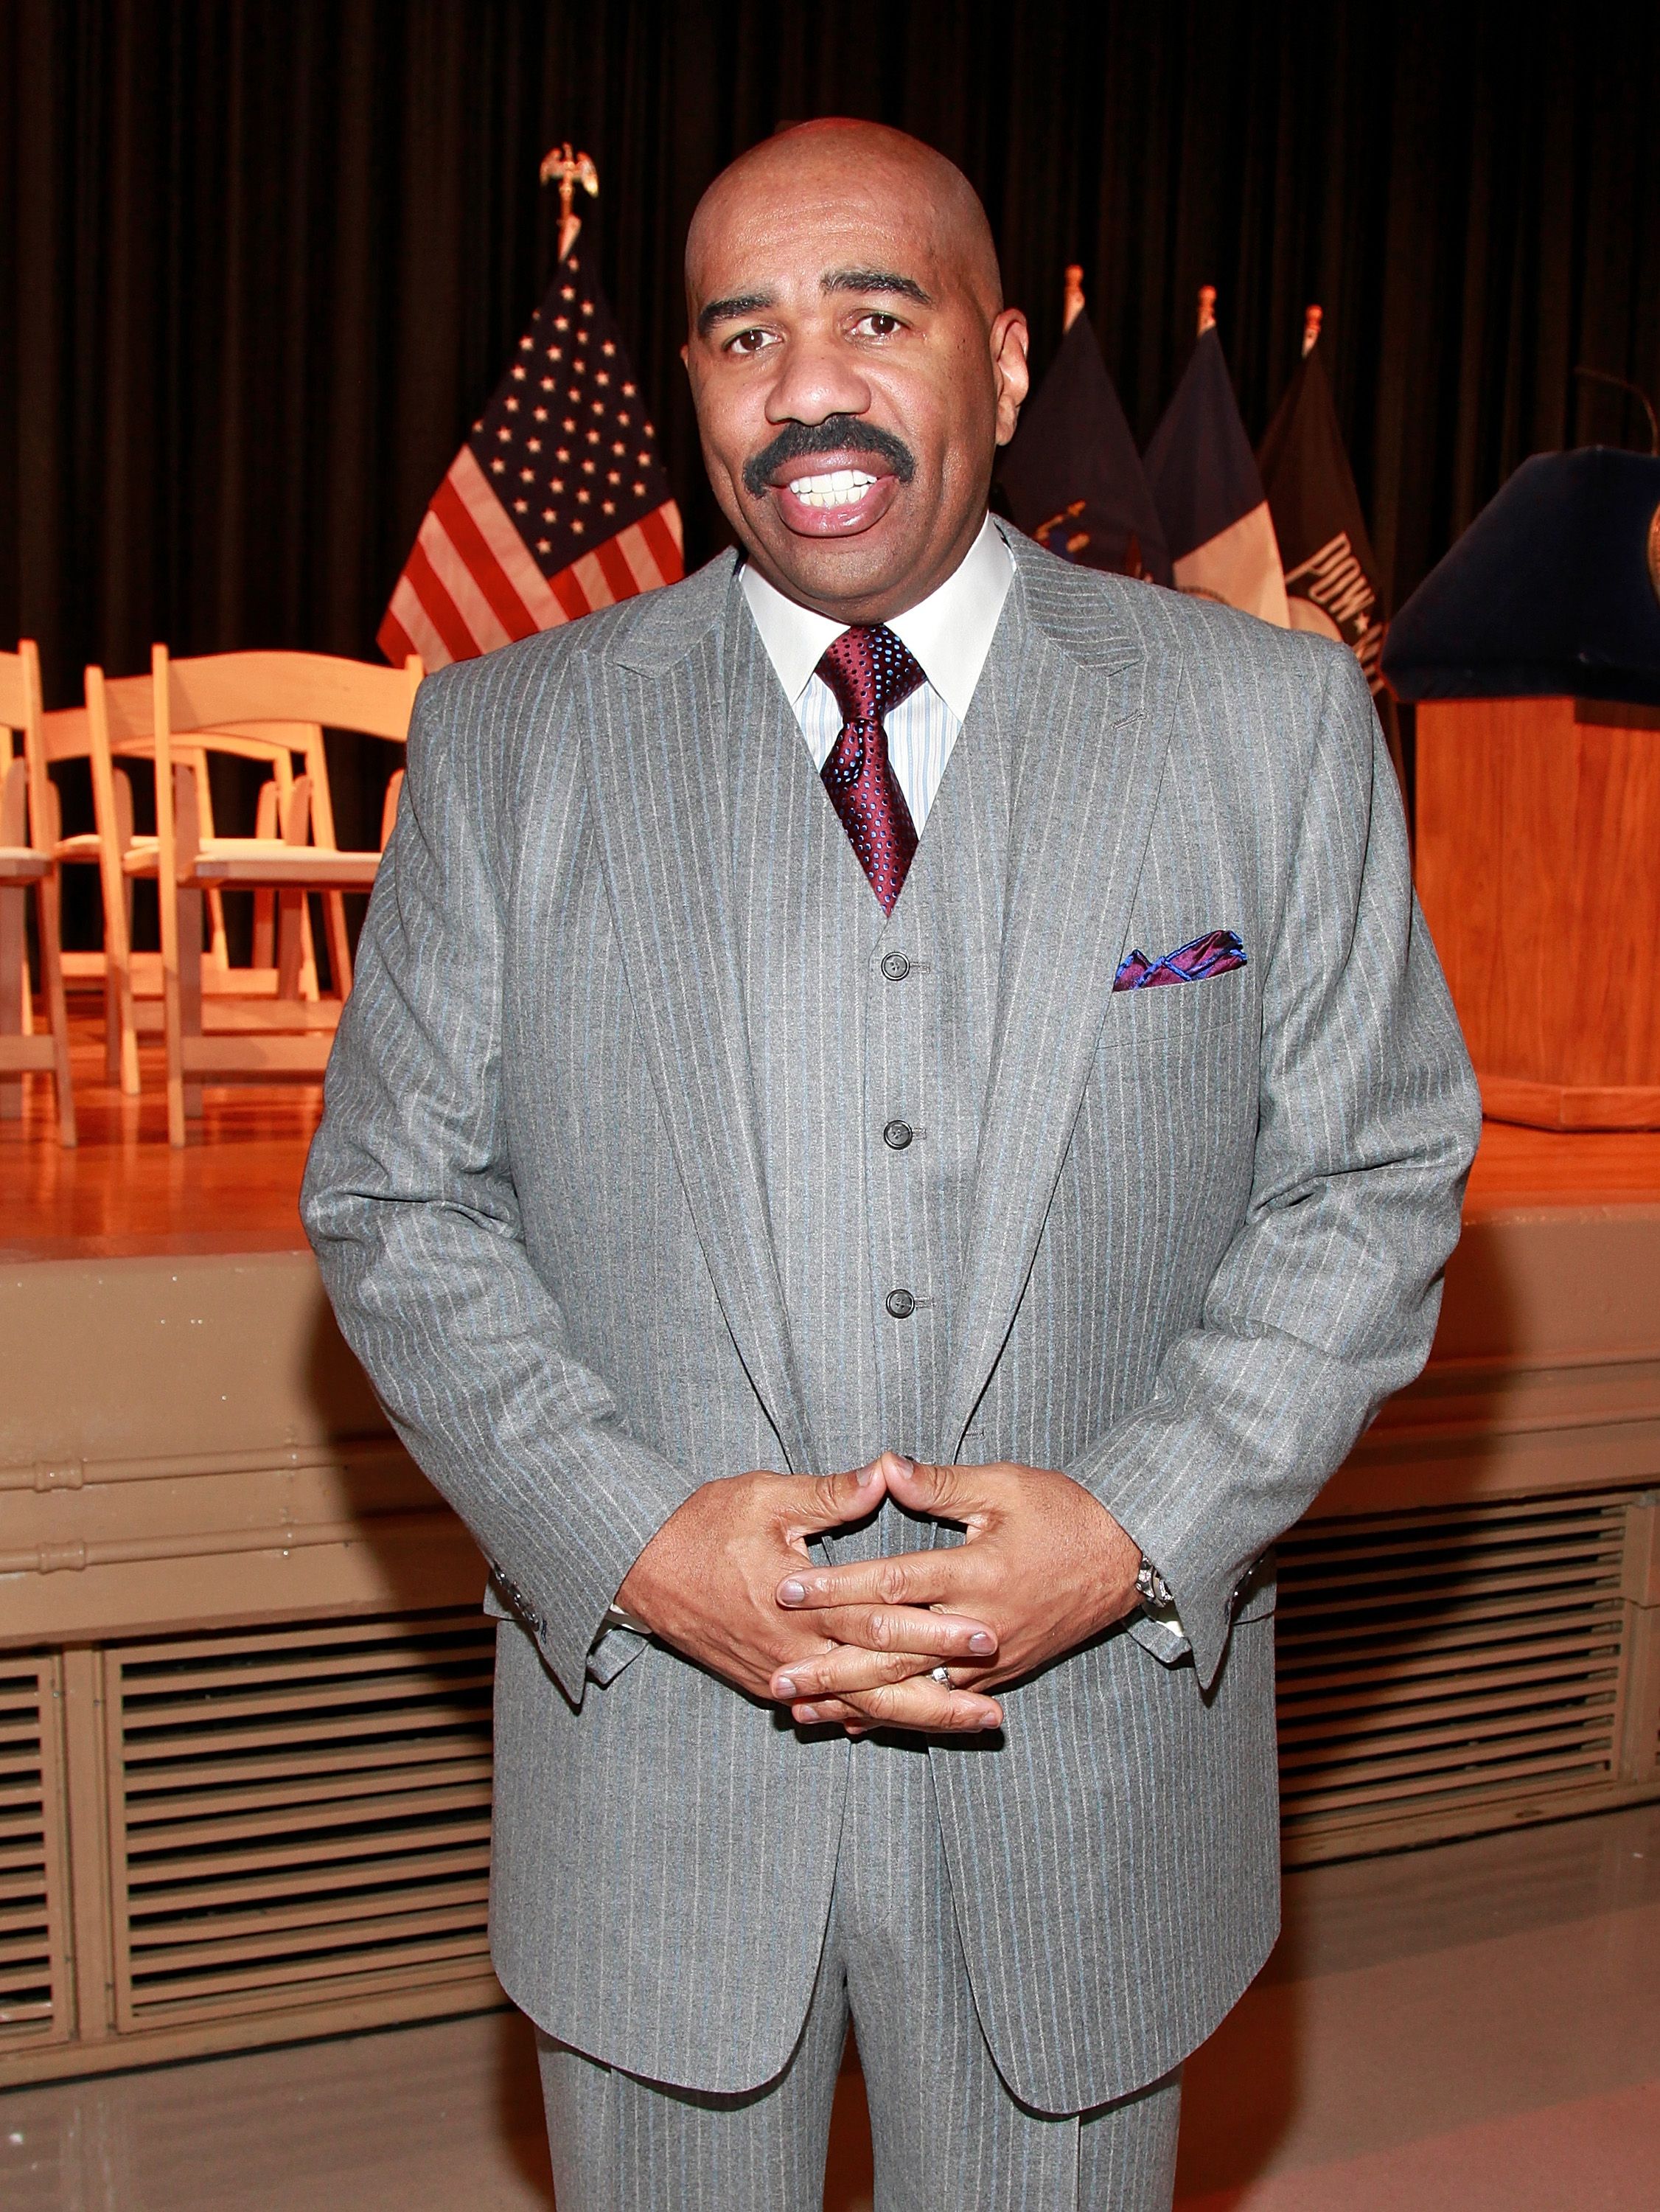  Steve Harvey during the NYC Service Mentor It Forward Program breakfast reception in honor of Martin Luther King Jr. Day at Martin Luther King High School on January 17, 2011 in New York City. | Source: Getty Images